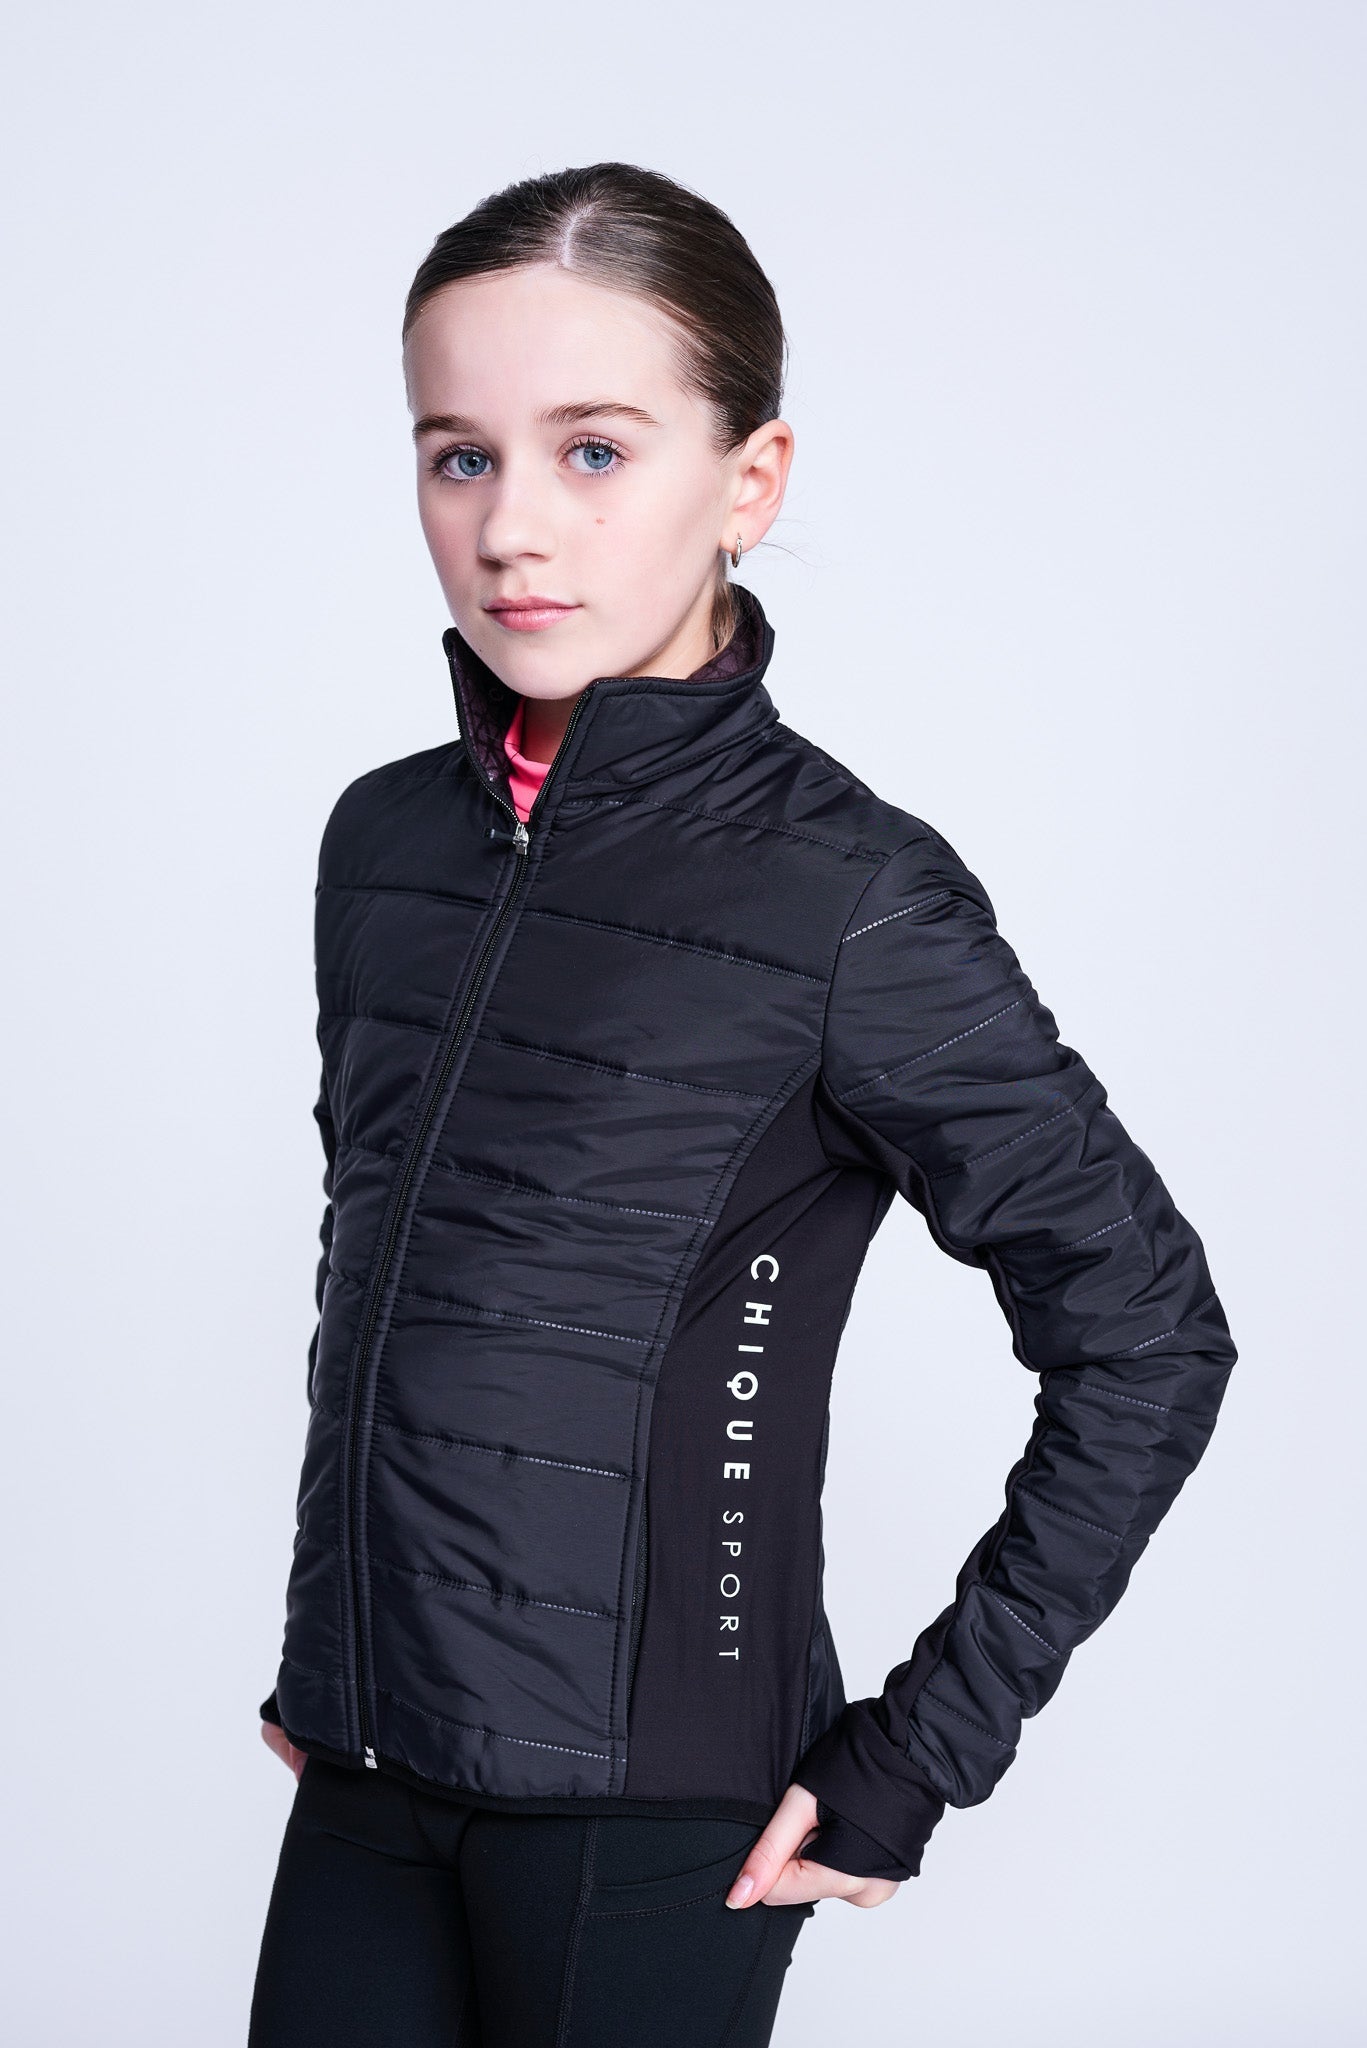 CHIQUE SPORT Girls' Train to win coat size 140 RRP £128